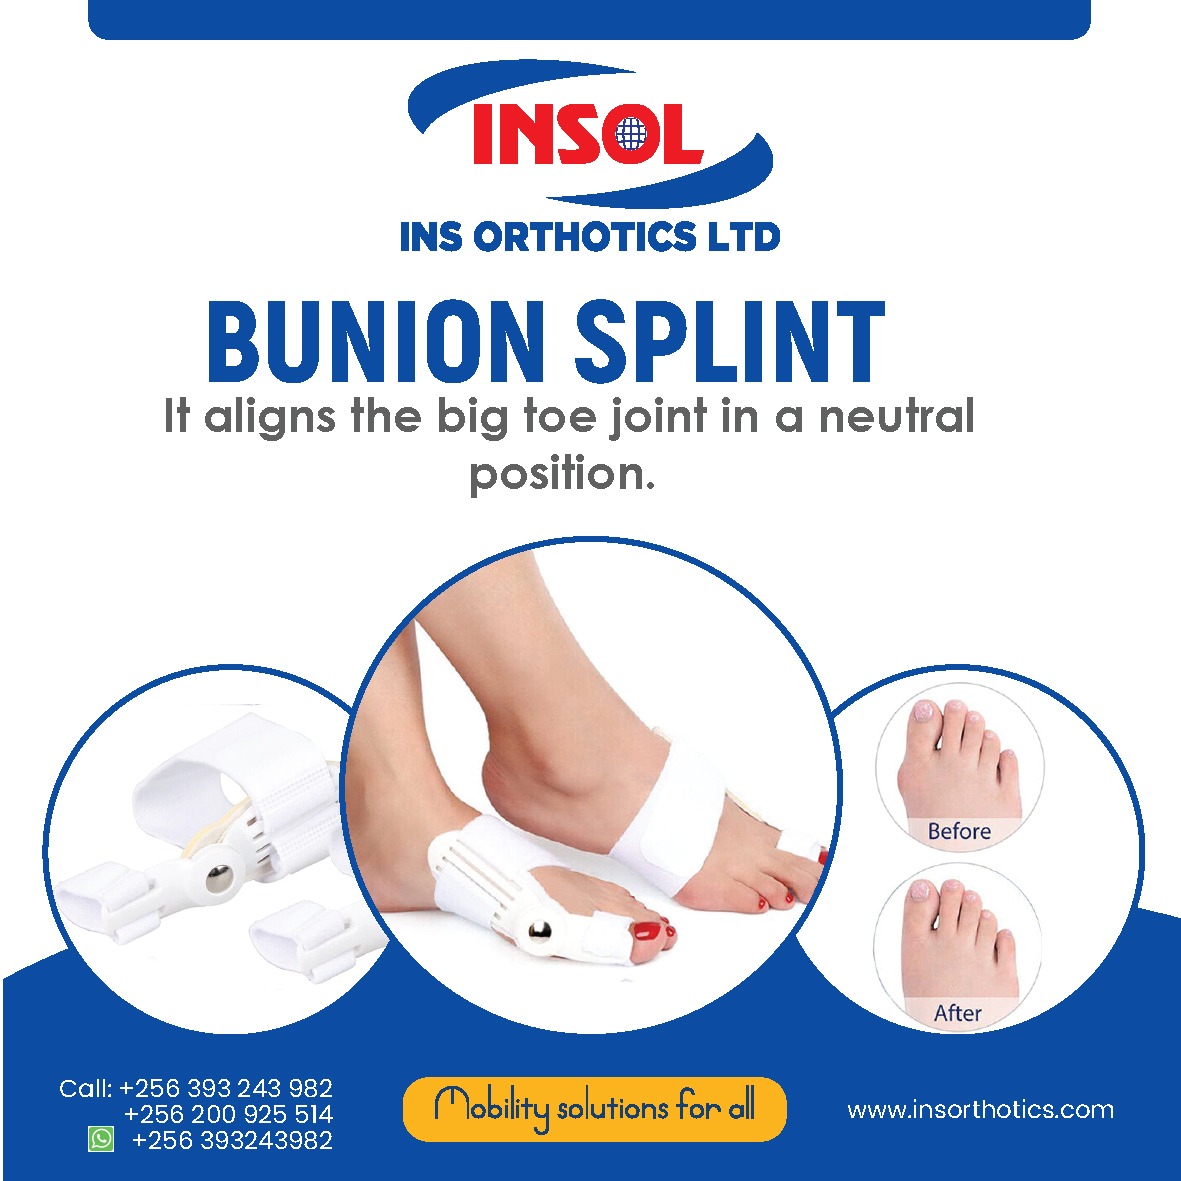 The bunion splint consists of a cushioned pad that sits over the bunion, along with straps that gently pull the big toe back into its proper position providing support and maintaining correct alignment.